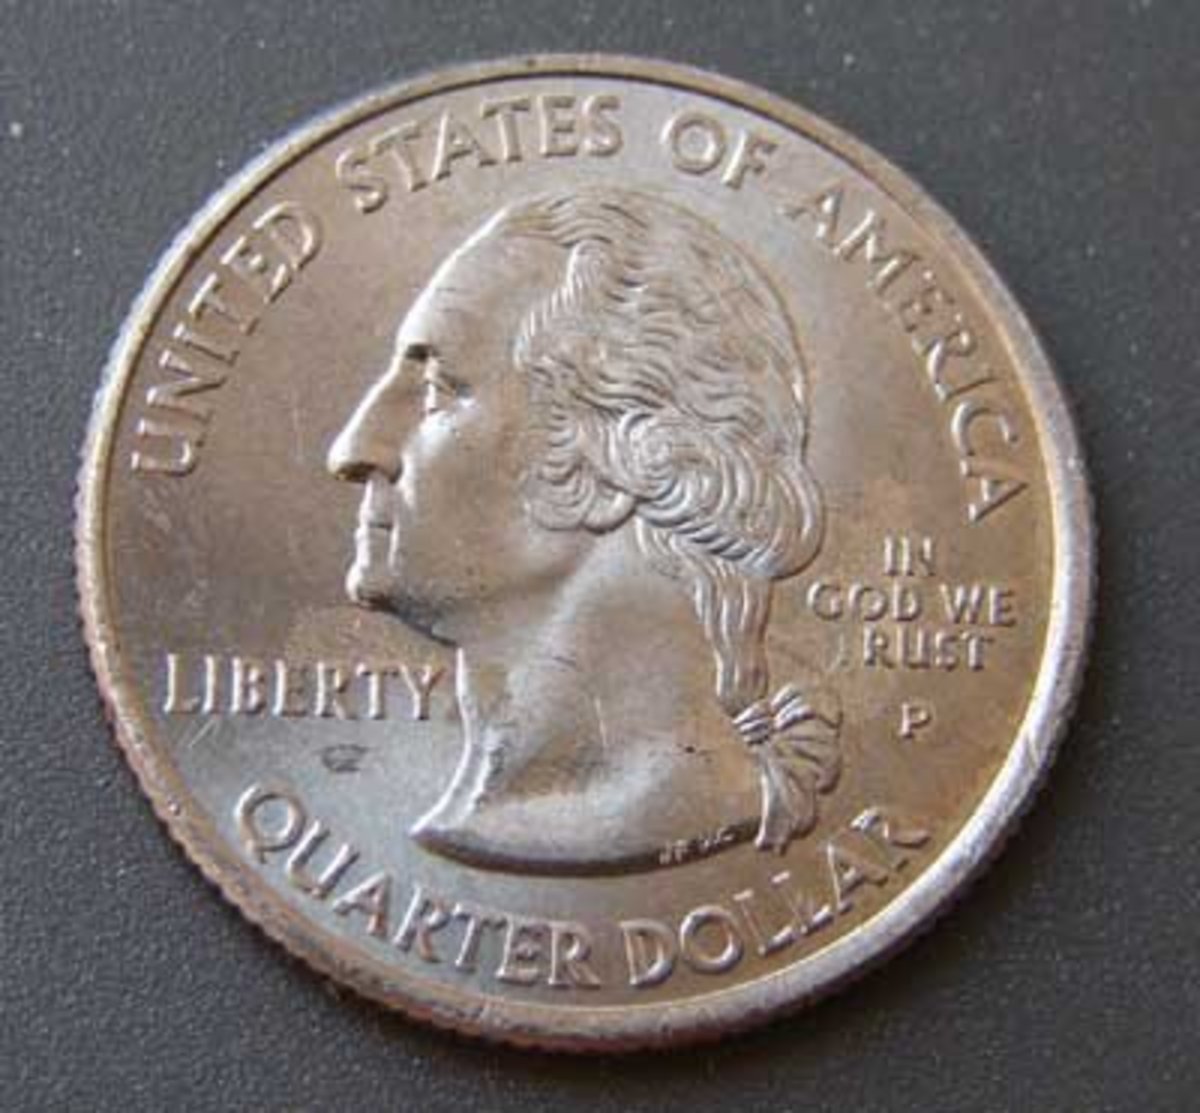 2002 P or D Tennesee 50 States Quarter Get 5th Free